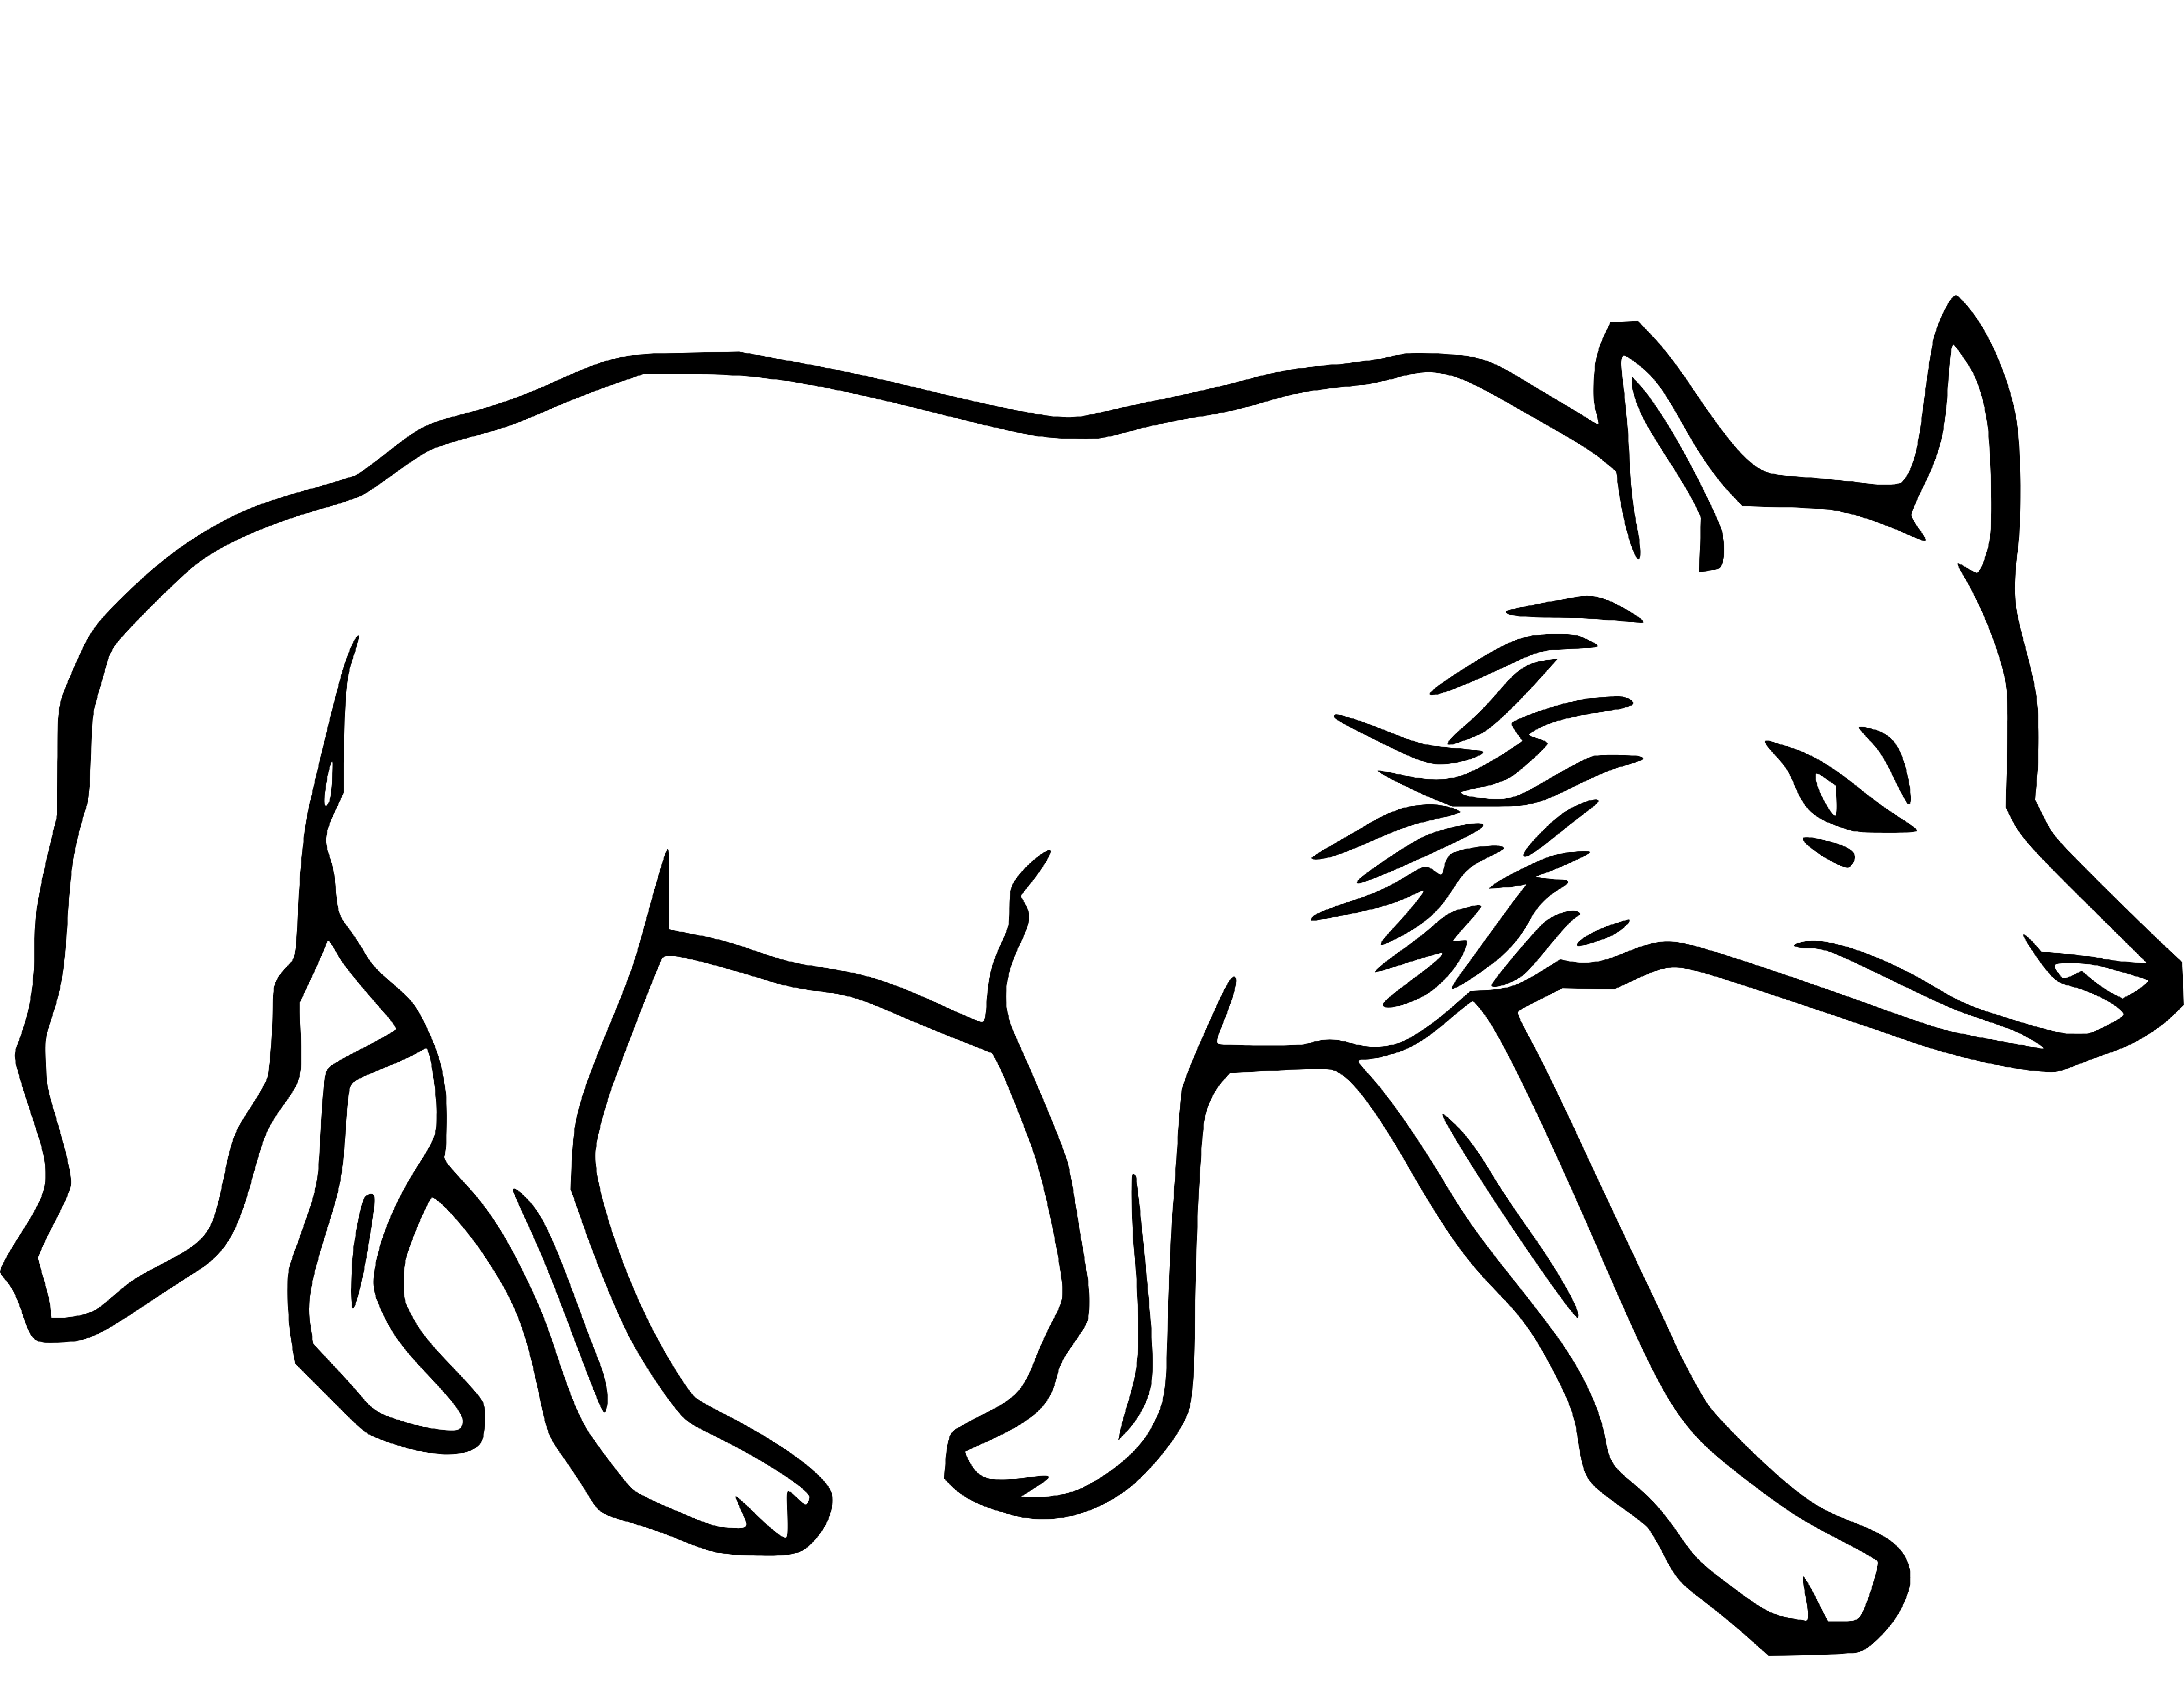 Easy Wolf Coloring Page for Kids Printable and Free - SheetalColor.com